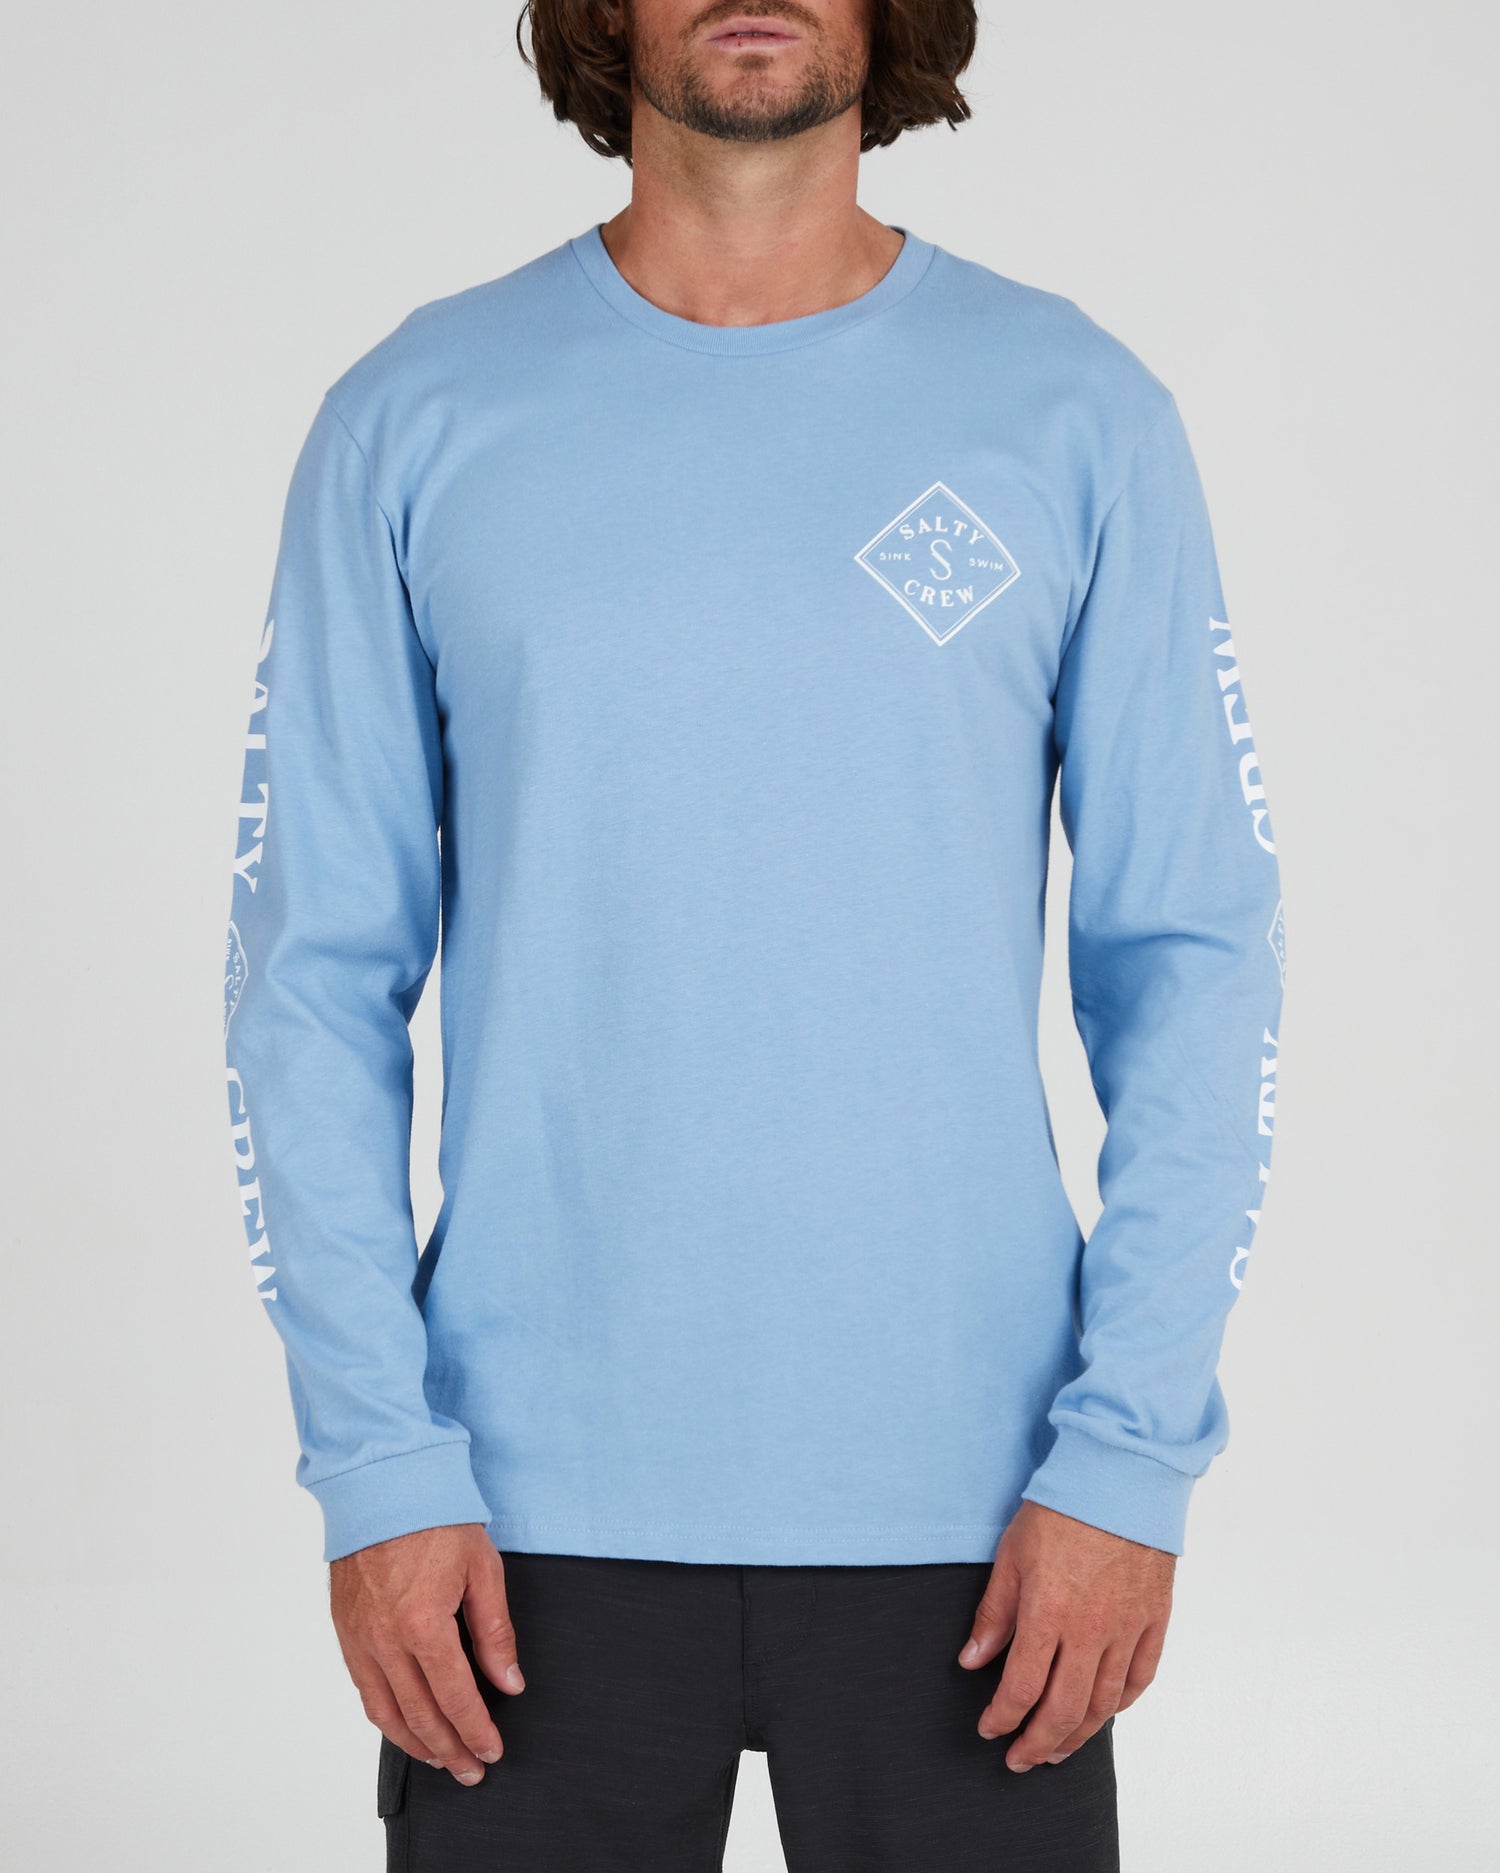 On body front of the Tippet Marine Blue L/S Premium Tee